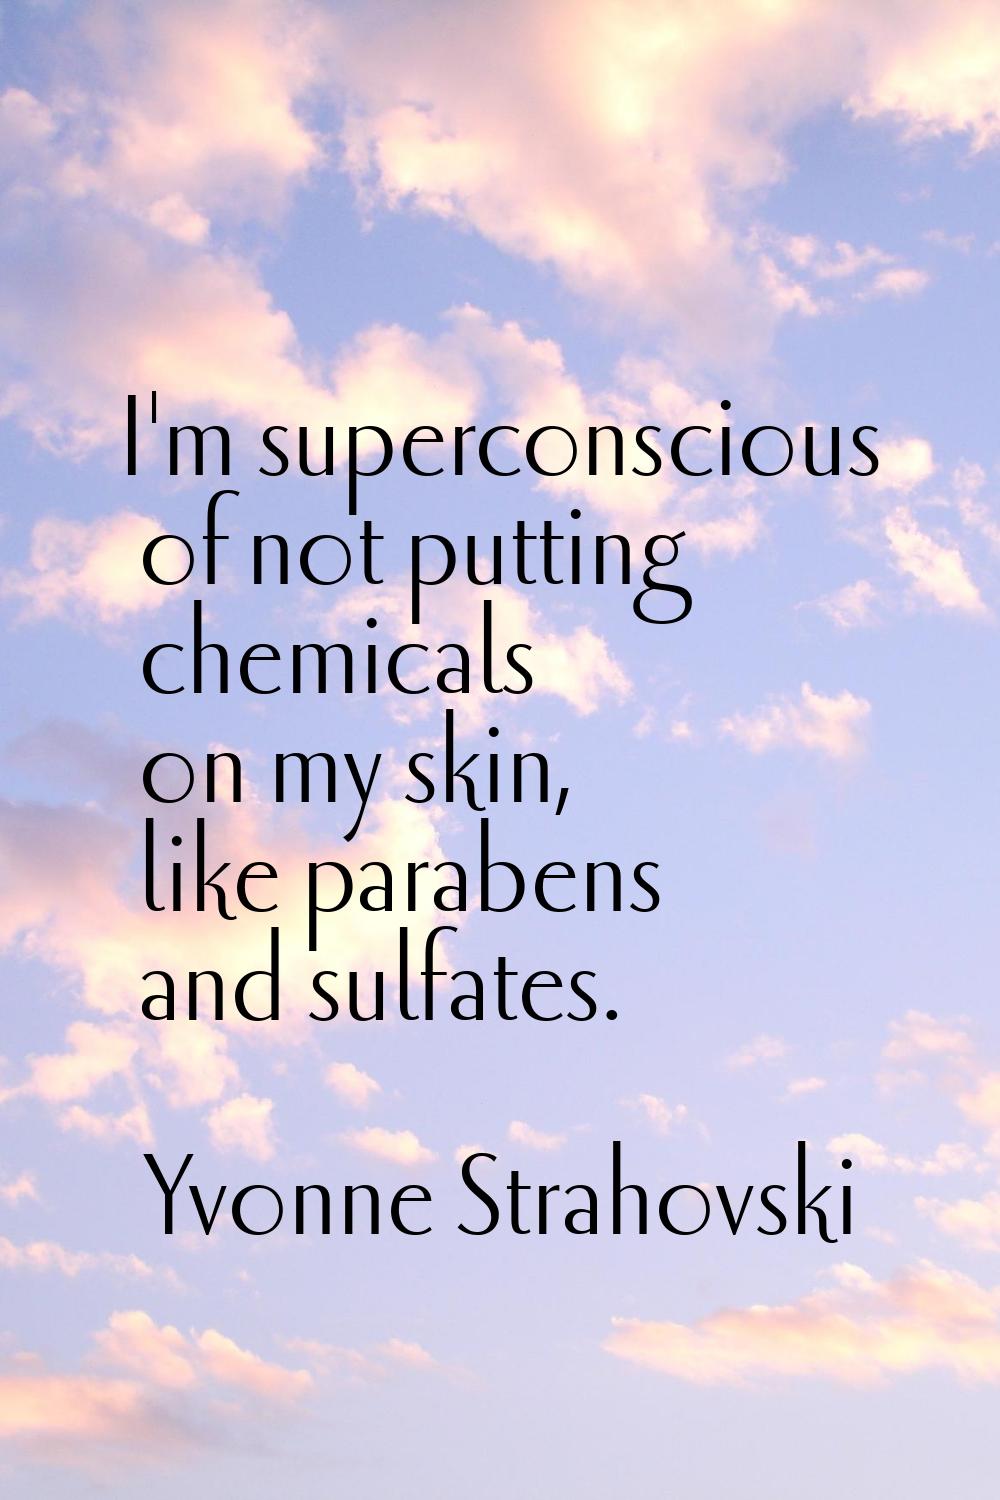 I'm superconscious of not putting chemicals on my skin, like parabens and sulfates.